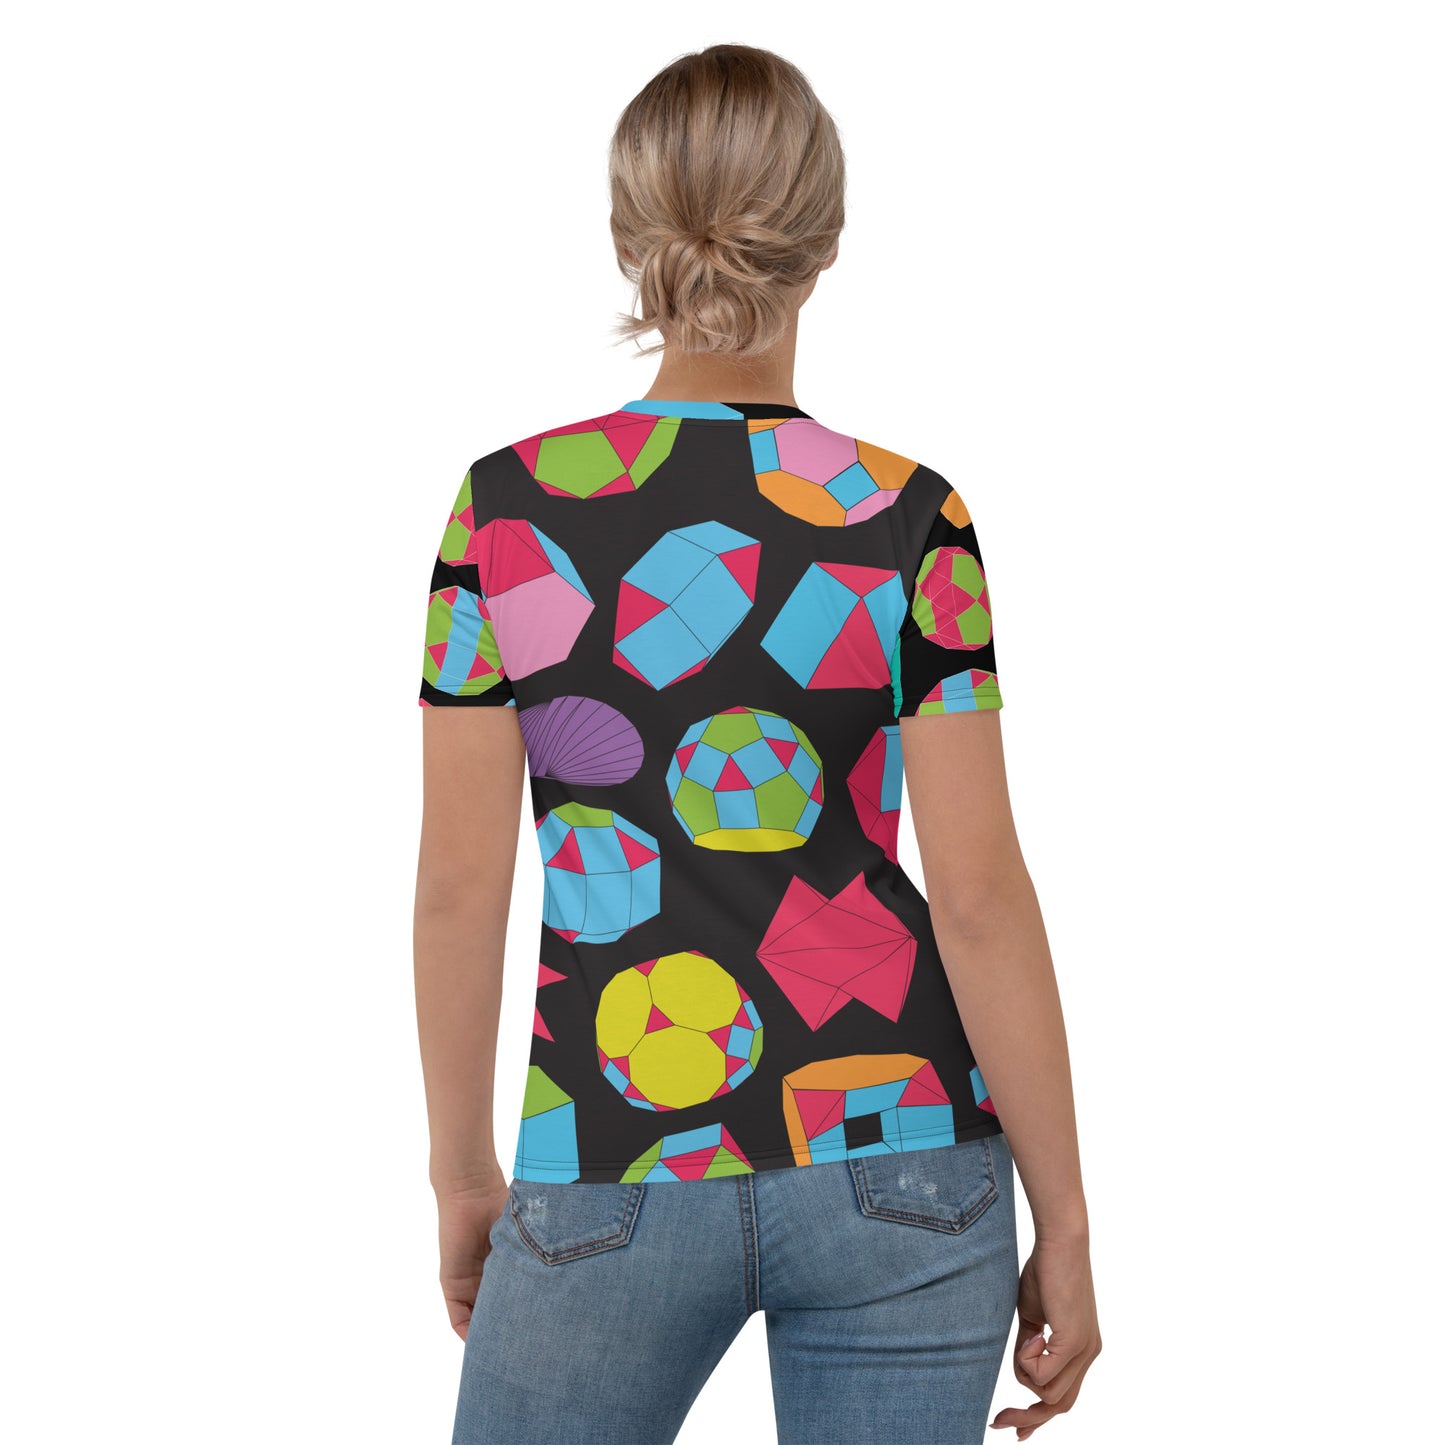 ALL THE SHAPES LARGE-SCALE: Women's Allover T-shirt